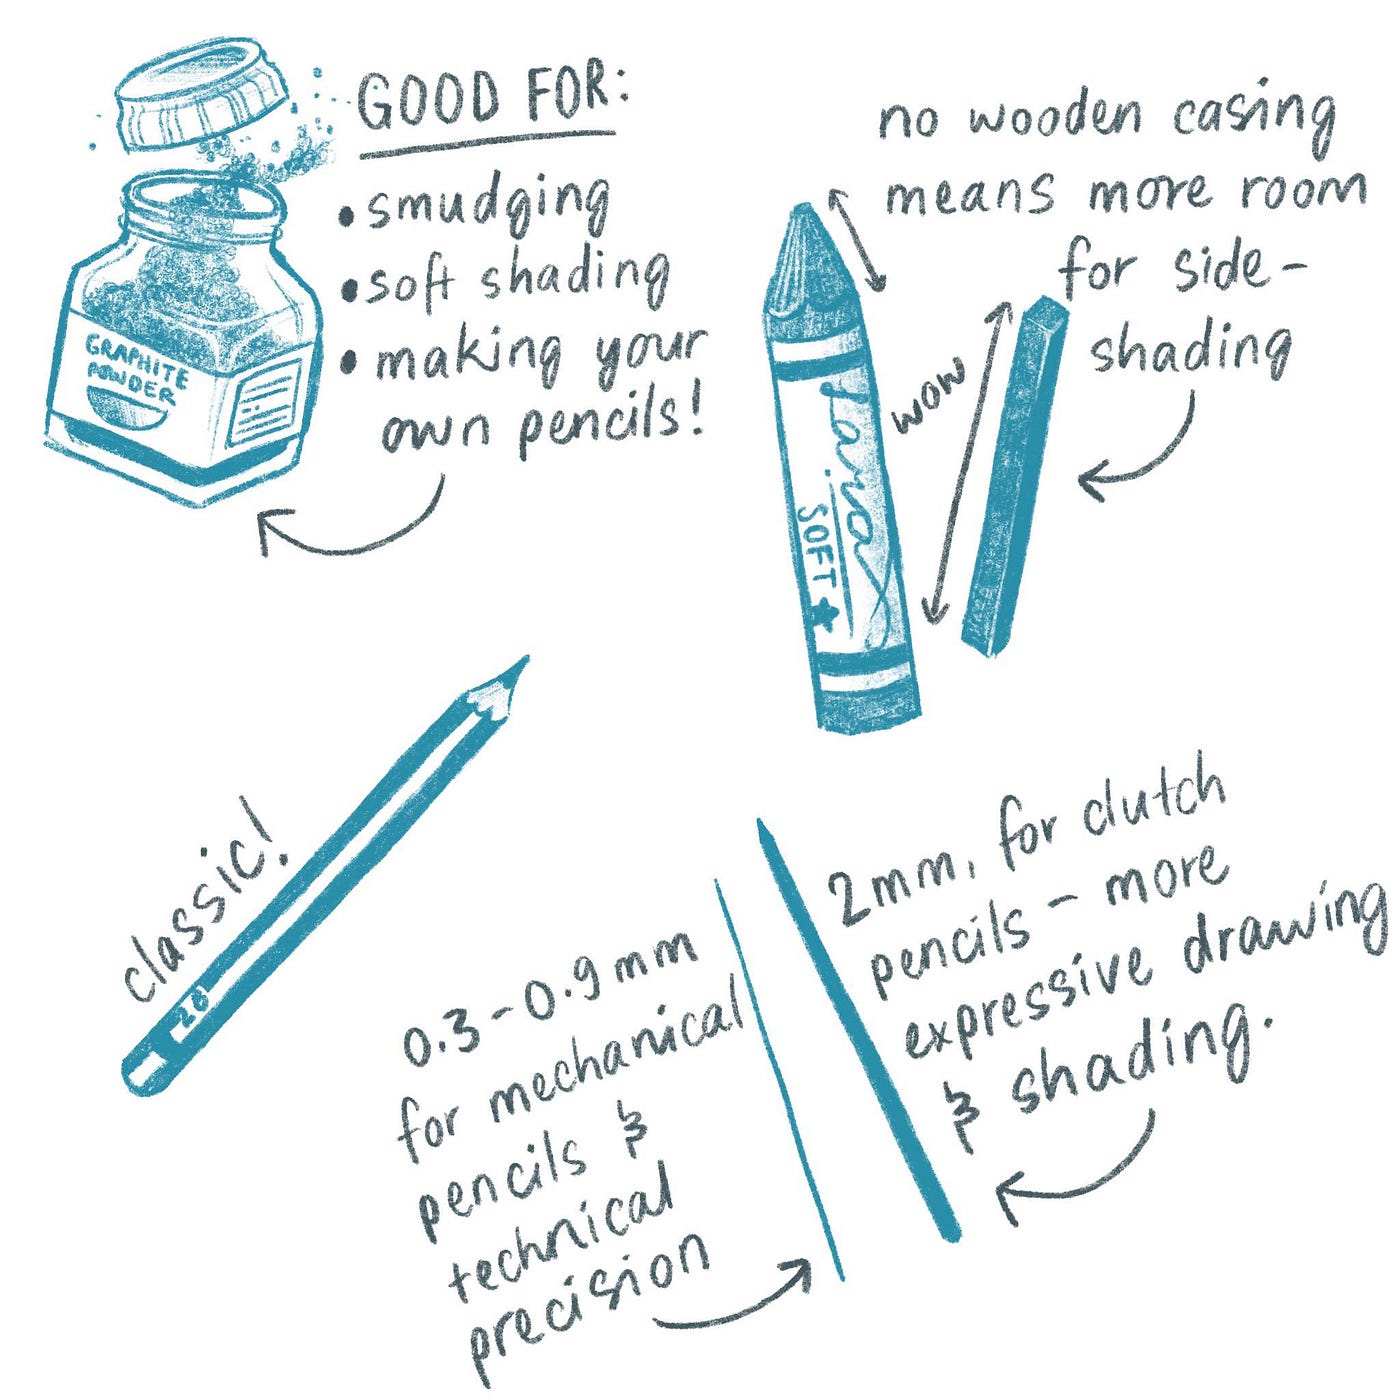 Types of Pencils Used For Sketching and Shading (Guide), by crystal